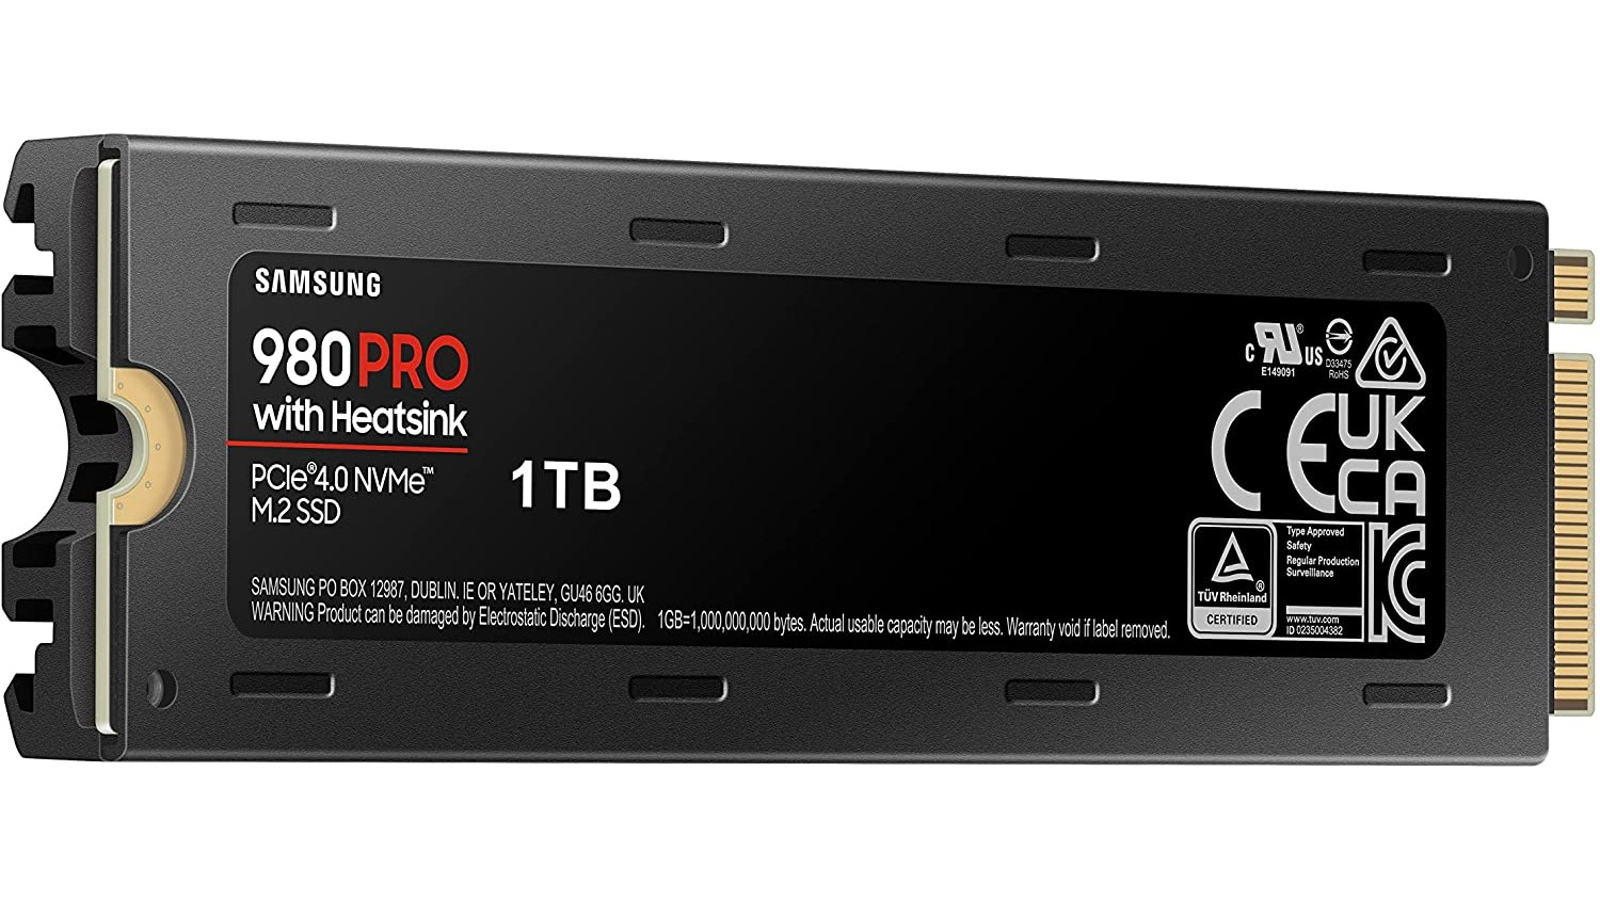 Samsung is releasing a 980 Pro PS5 SSD with a heatsink later this month